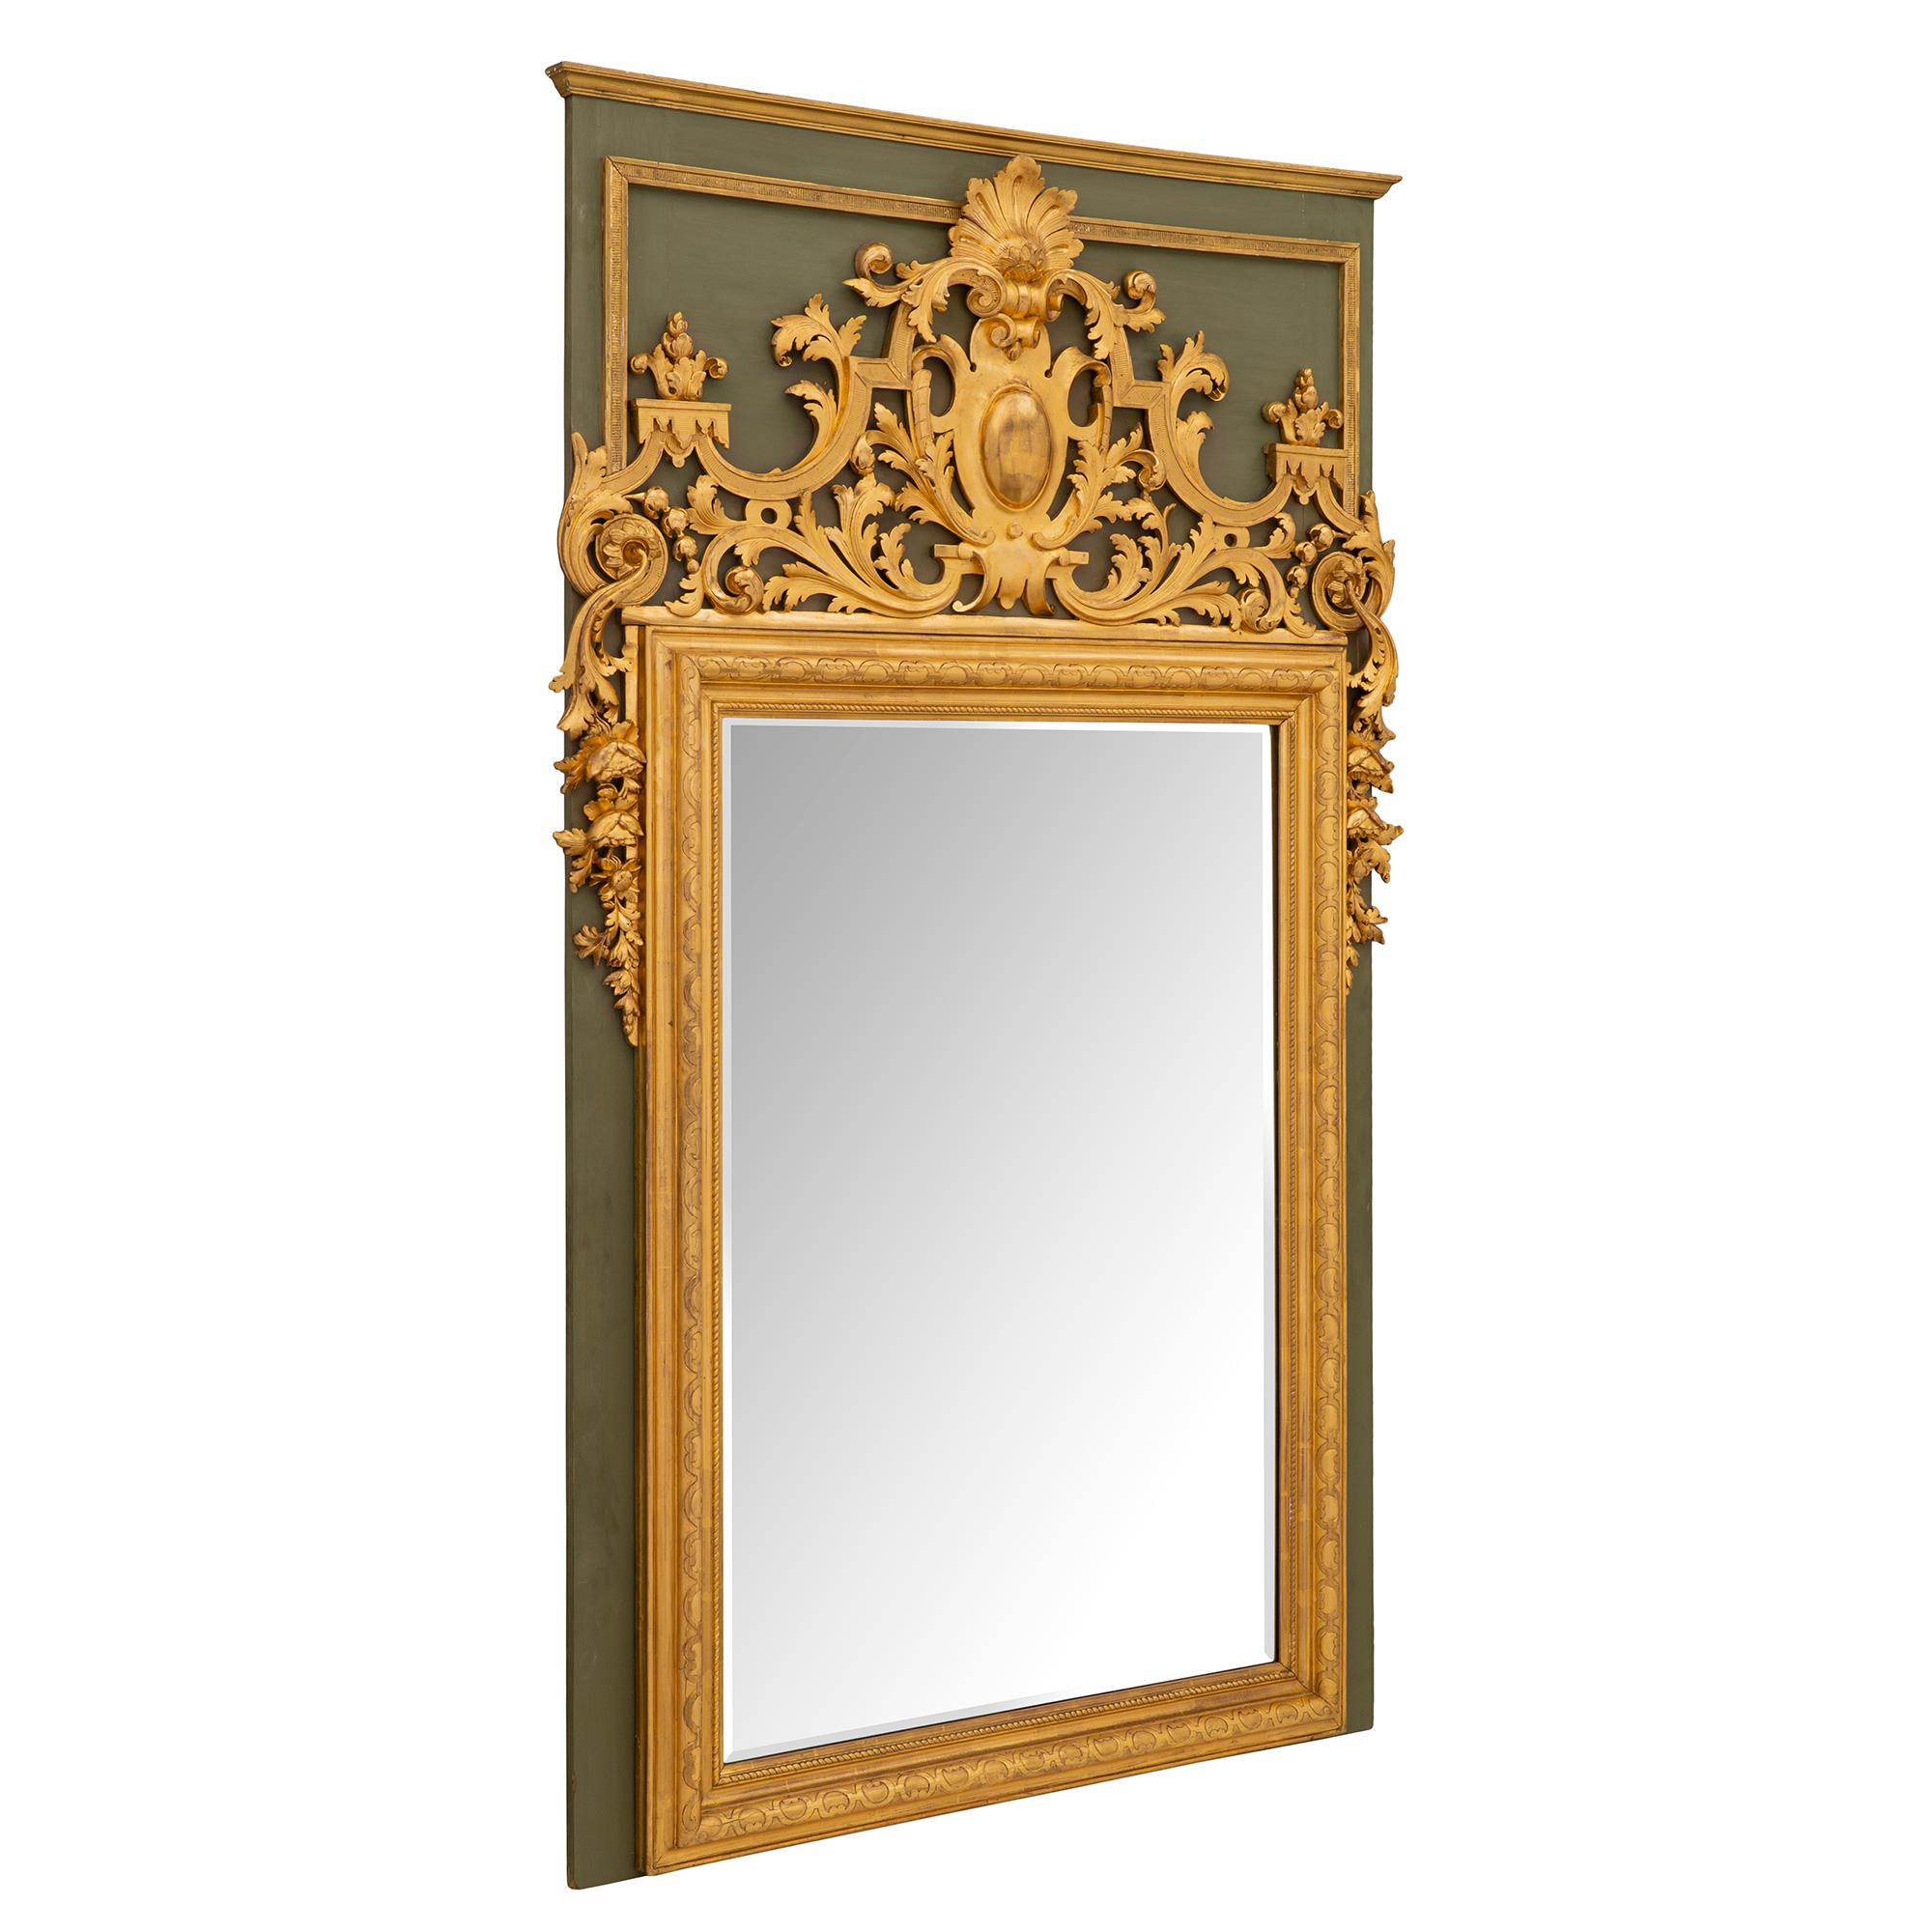 A superb French 19th century Louis XIV st. polychrome and giltwood mirror. The original beveled mirror plate is framed within a most decorative twisted rope designed band and Fine mottled giltwood border with elegant carved geometric patterns.